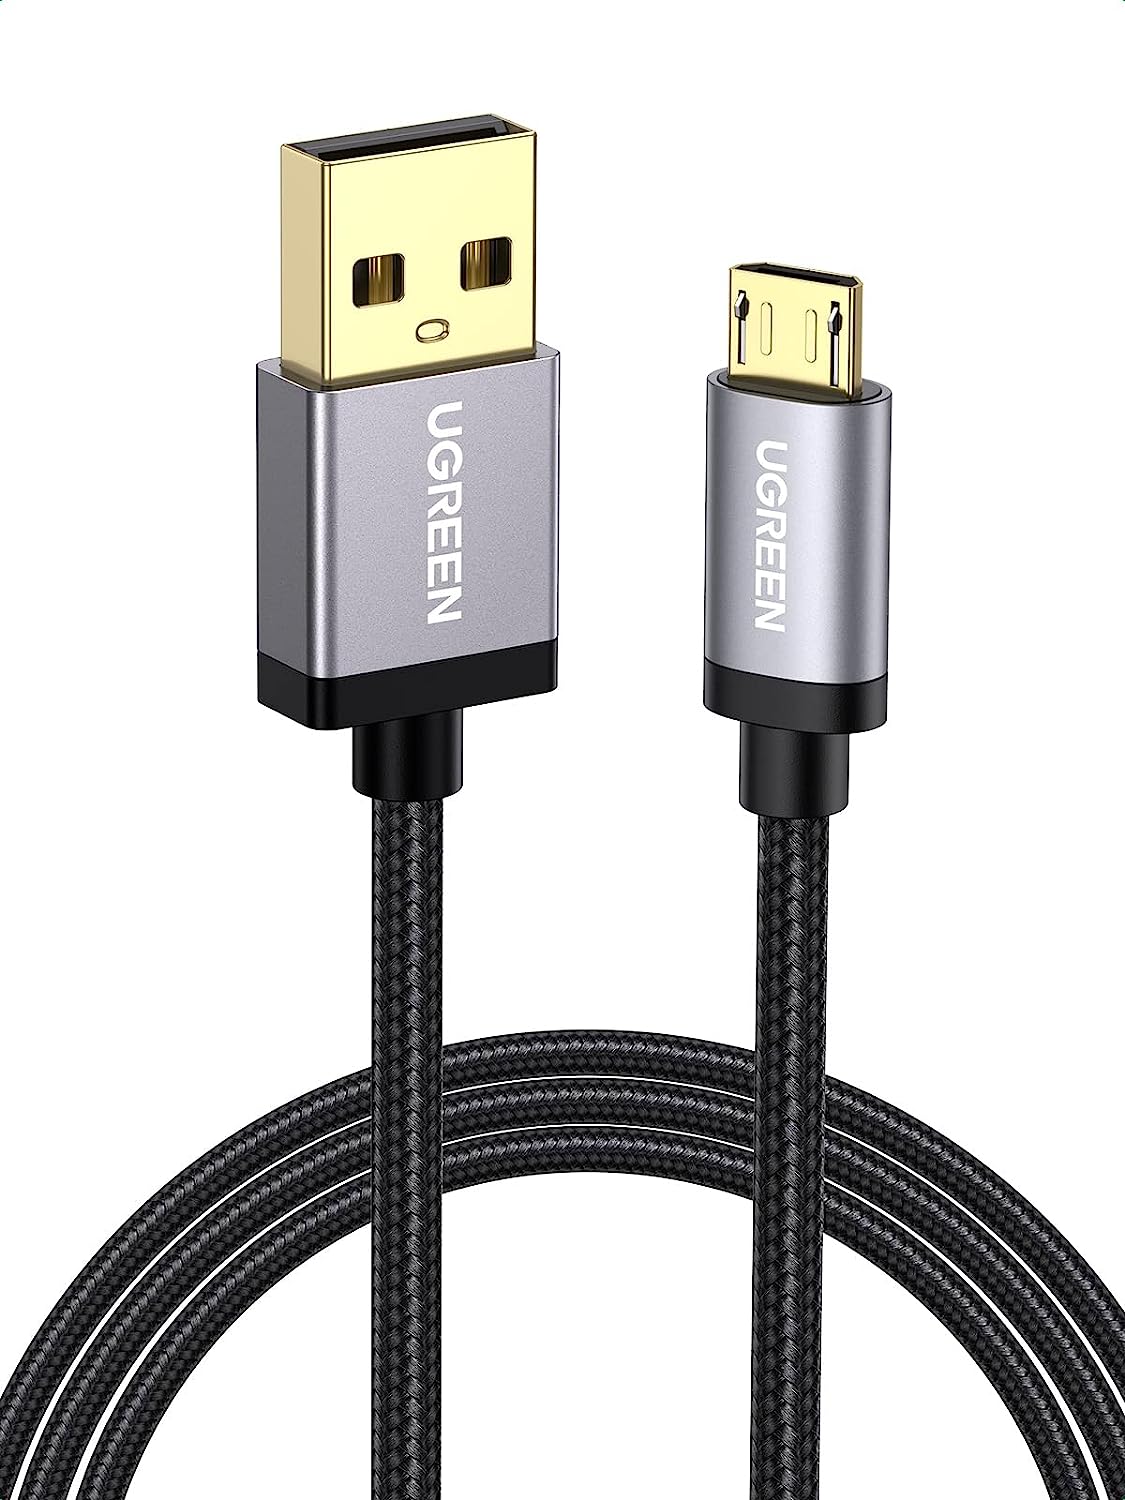 UGREEN Micro USB Cable, 3FT High Speed Fast Charging [...]